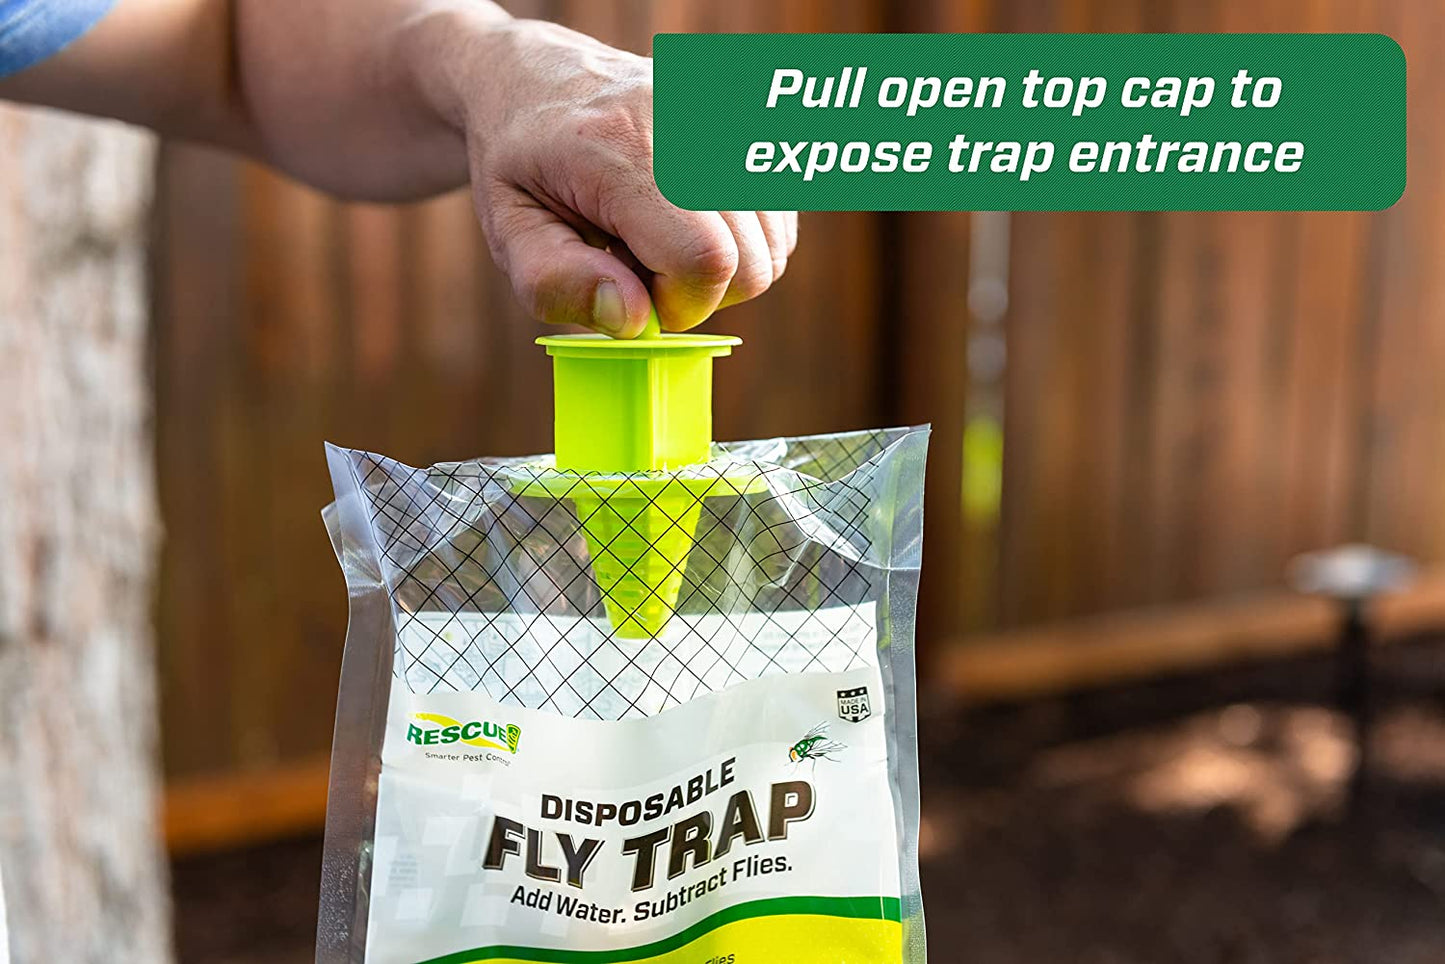 RESCUE! Outdoor Disposable Fly Trap, Green, 2 Pack